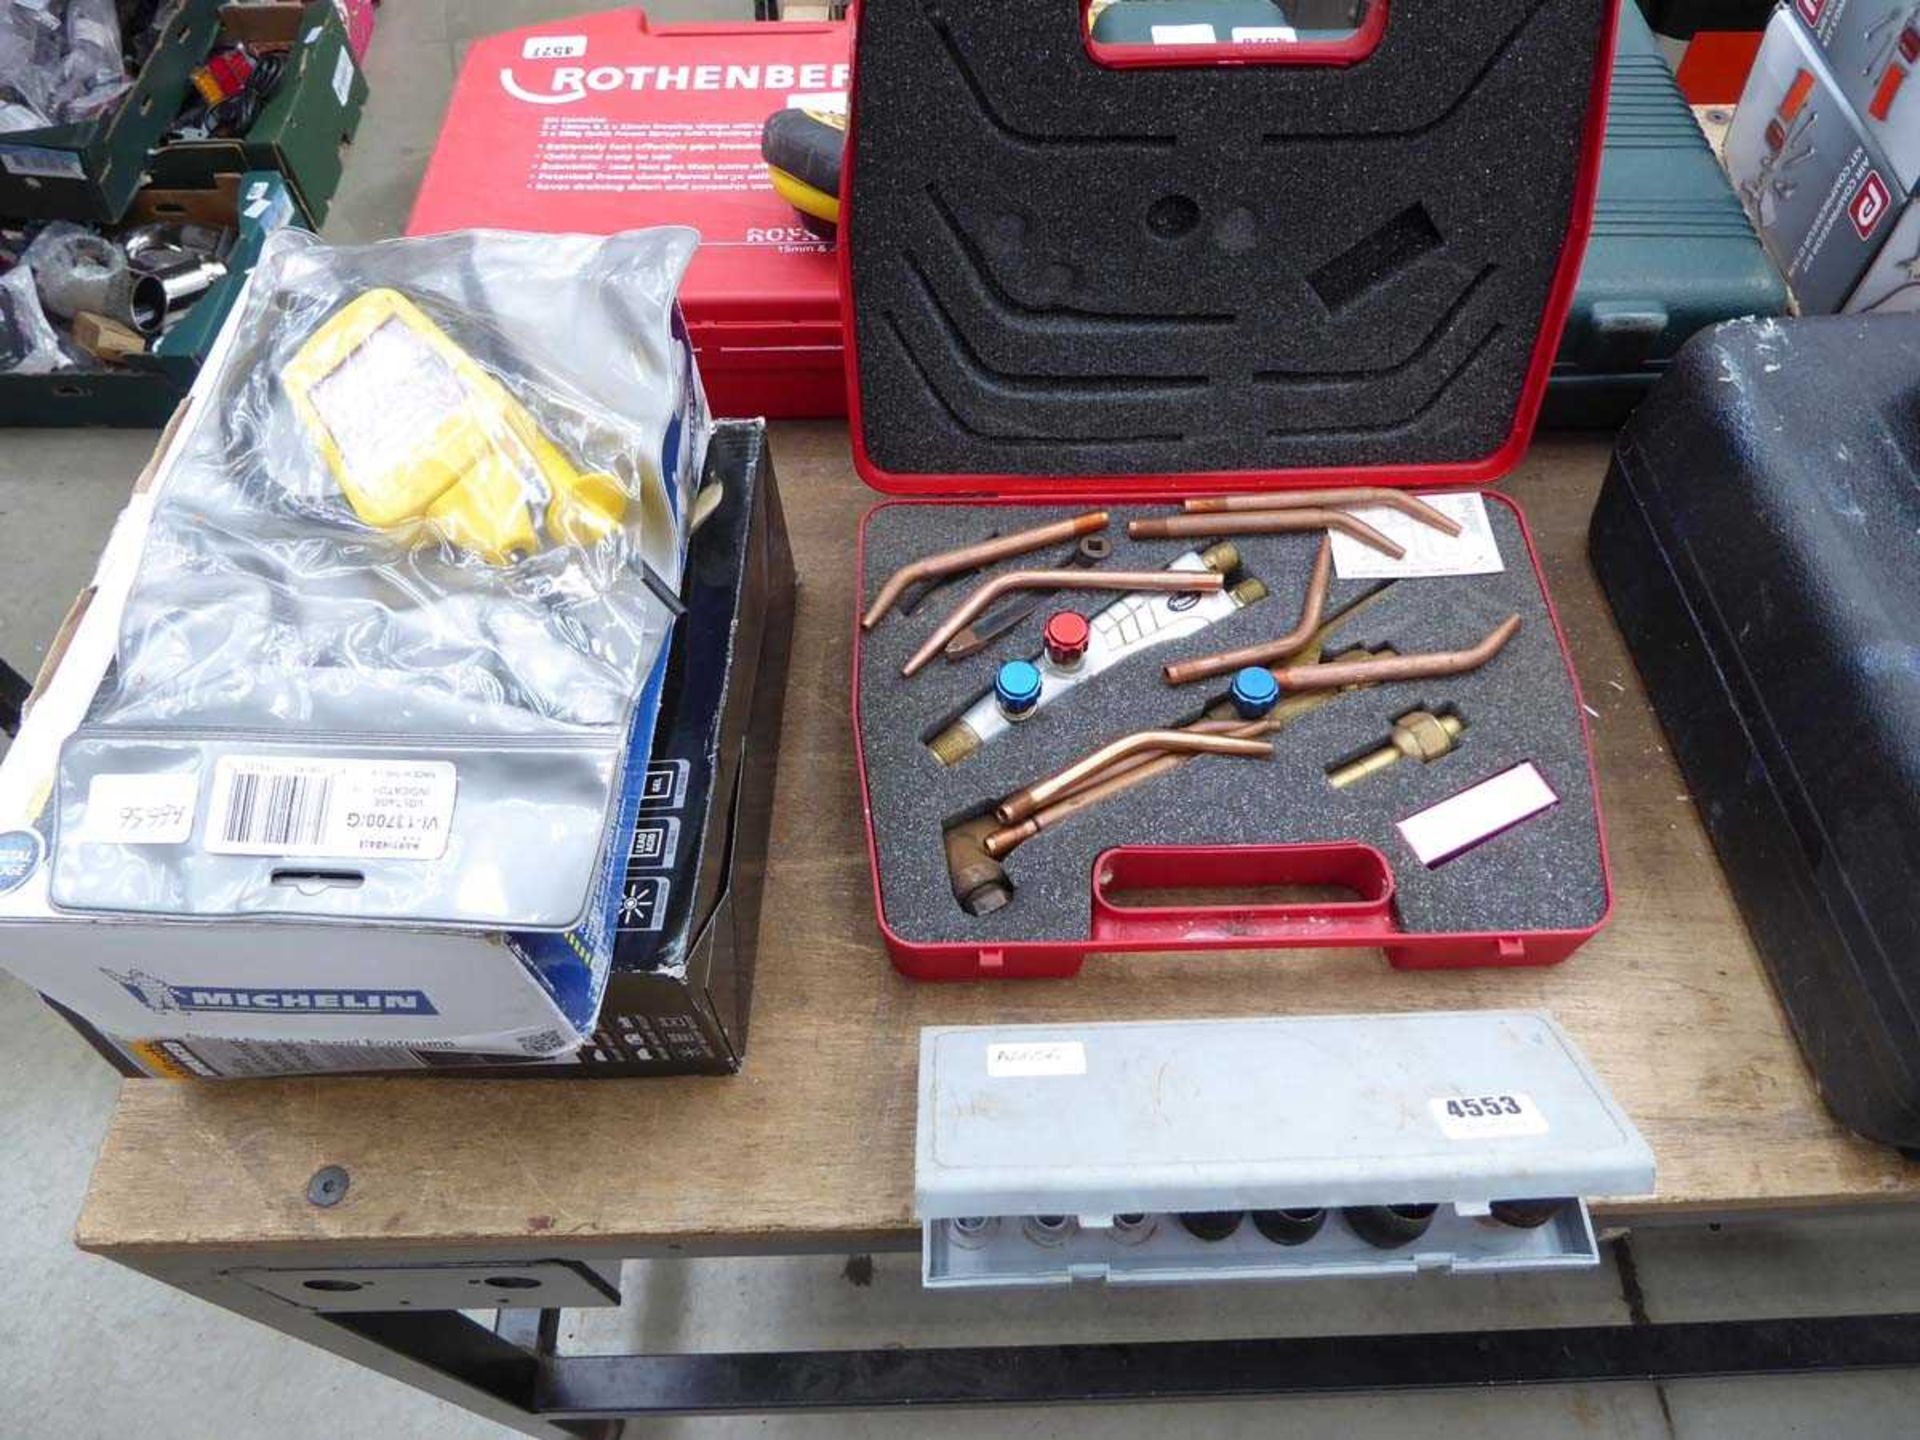 Specialist bit set, gas arc cutting nozzles, string line, electrical tester, foot pump, and